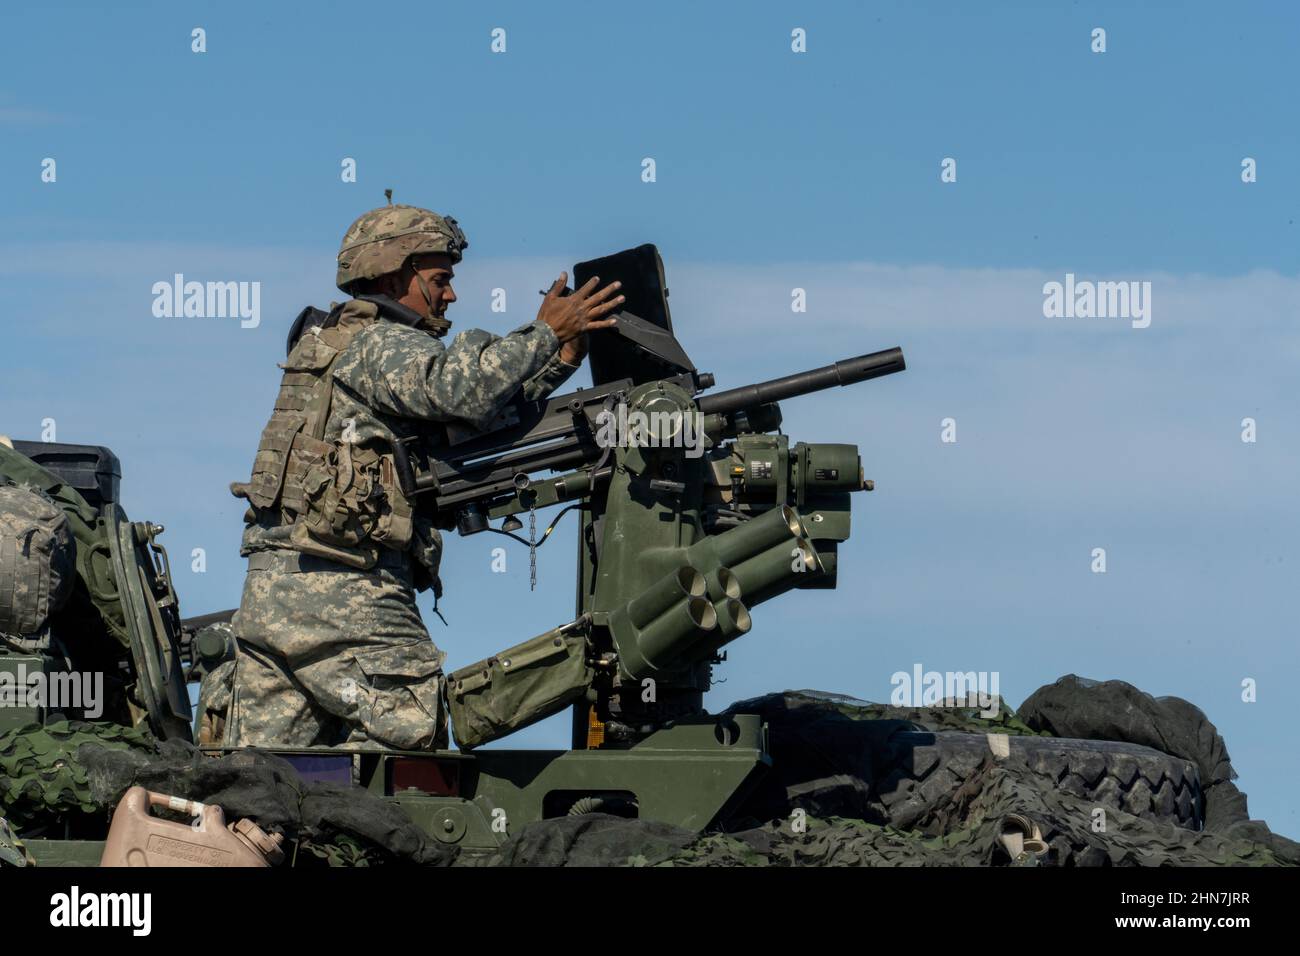 A U.S. Army Trooper assigned to 3d Cavalry Regiment reloads a MK19 Automatic Grenade Launcher during exercise Rifles Forge at Fort Hood Training Area, Fort Hood, Texas, Feb. 10, 2022. This exercise will prepare the unit to travel to the National Training Center at Fort Irwin, California, to certify the unit to deploy in a combat environment. (U.S. Army photo by Staff Sgt. Christopher Stewart) Stock Photo